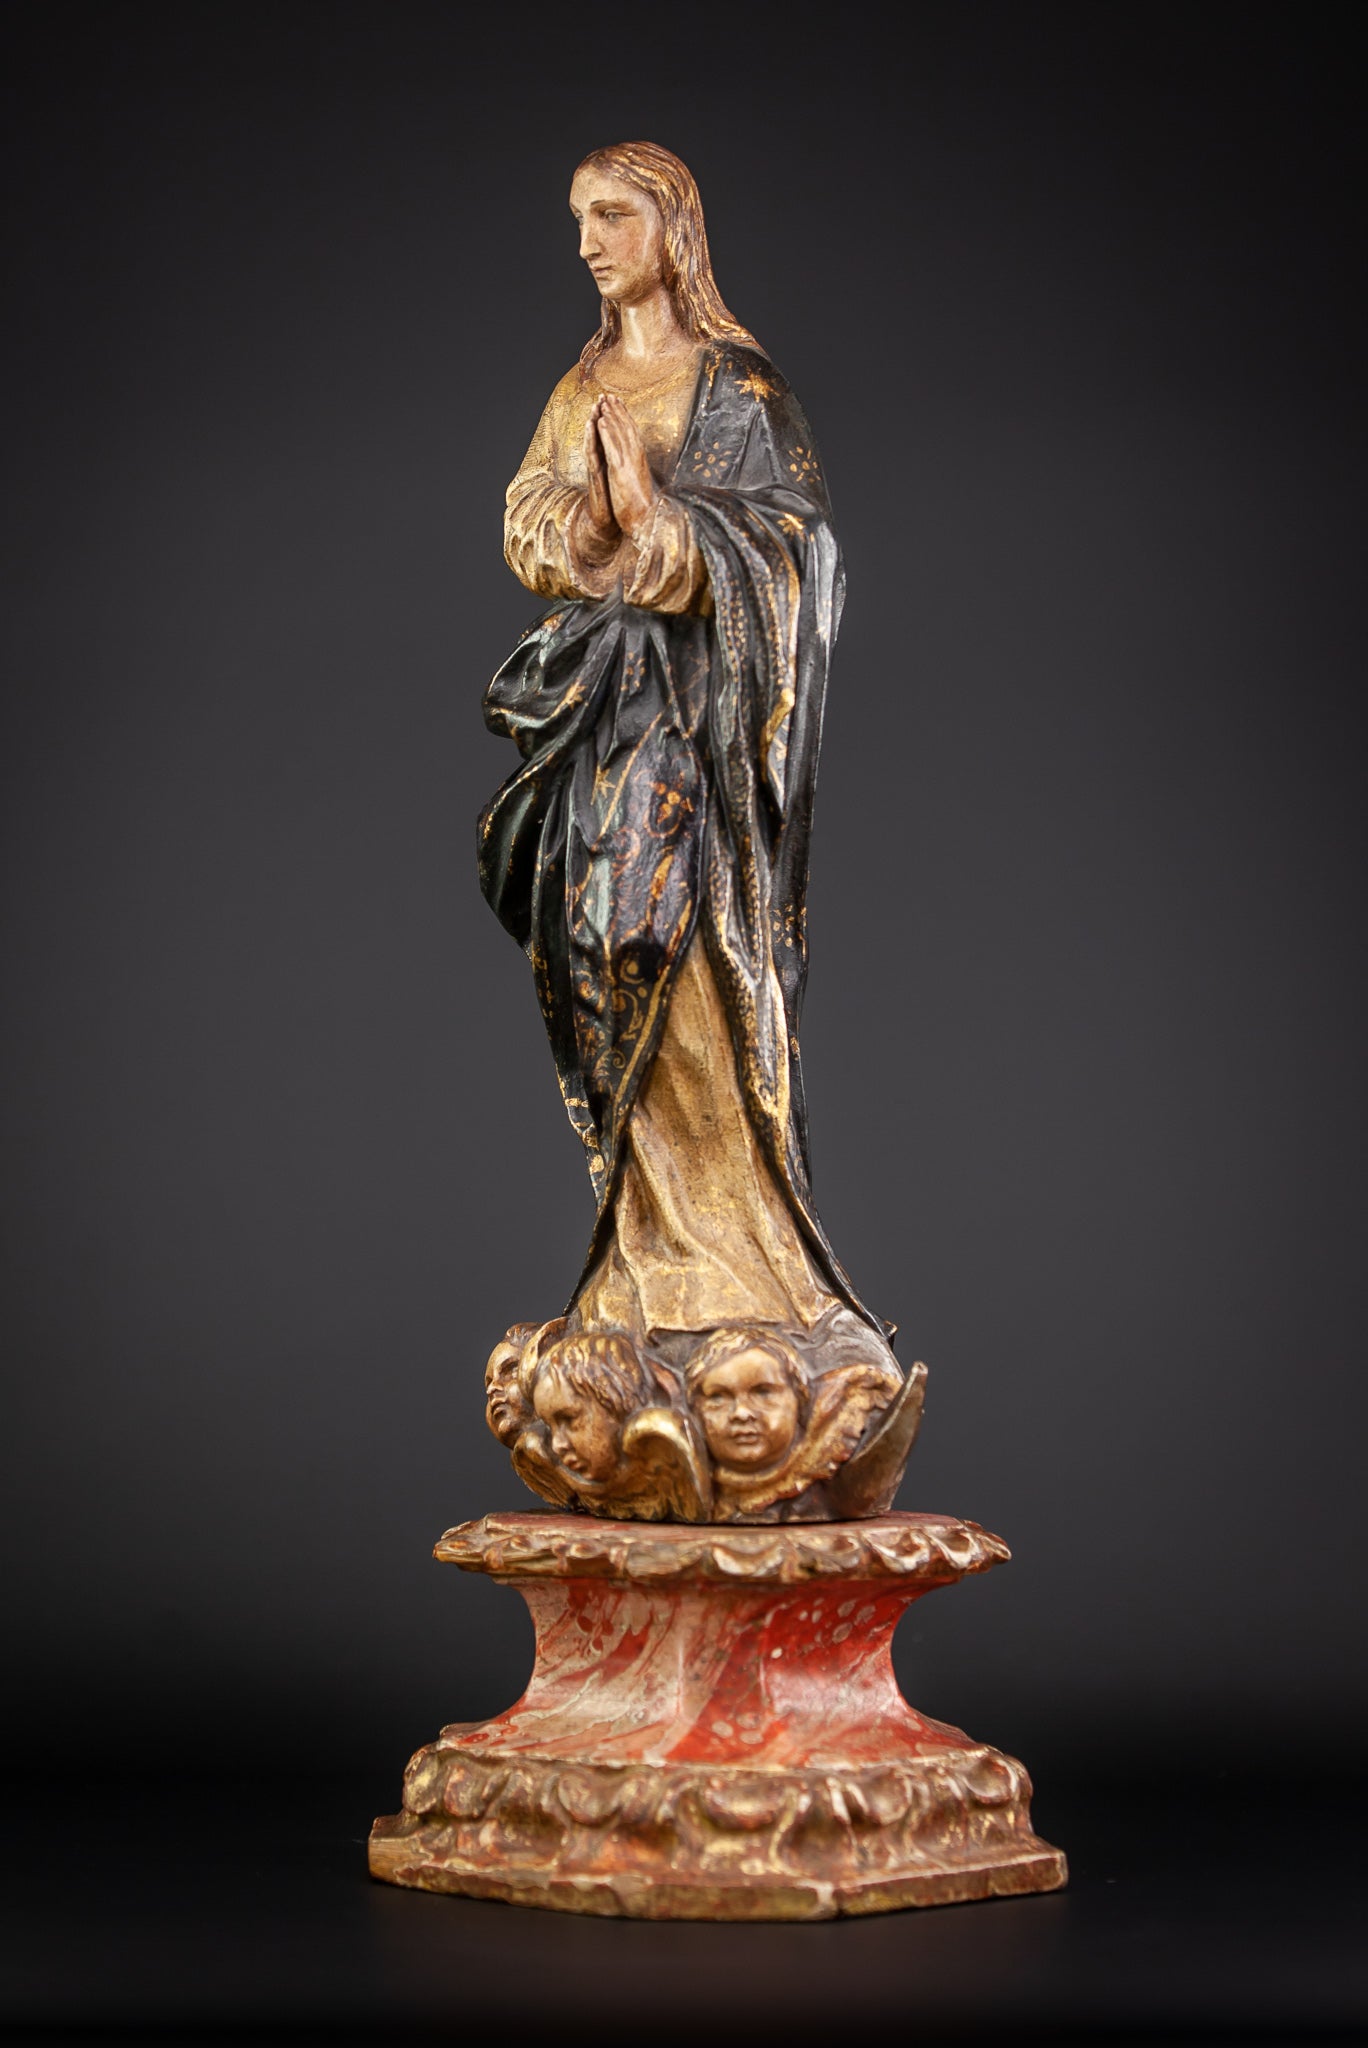 Virgin Mary Immaculate Conception 17th Century Wood 21"